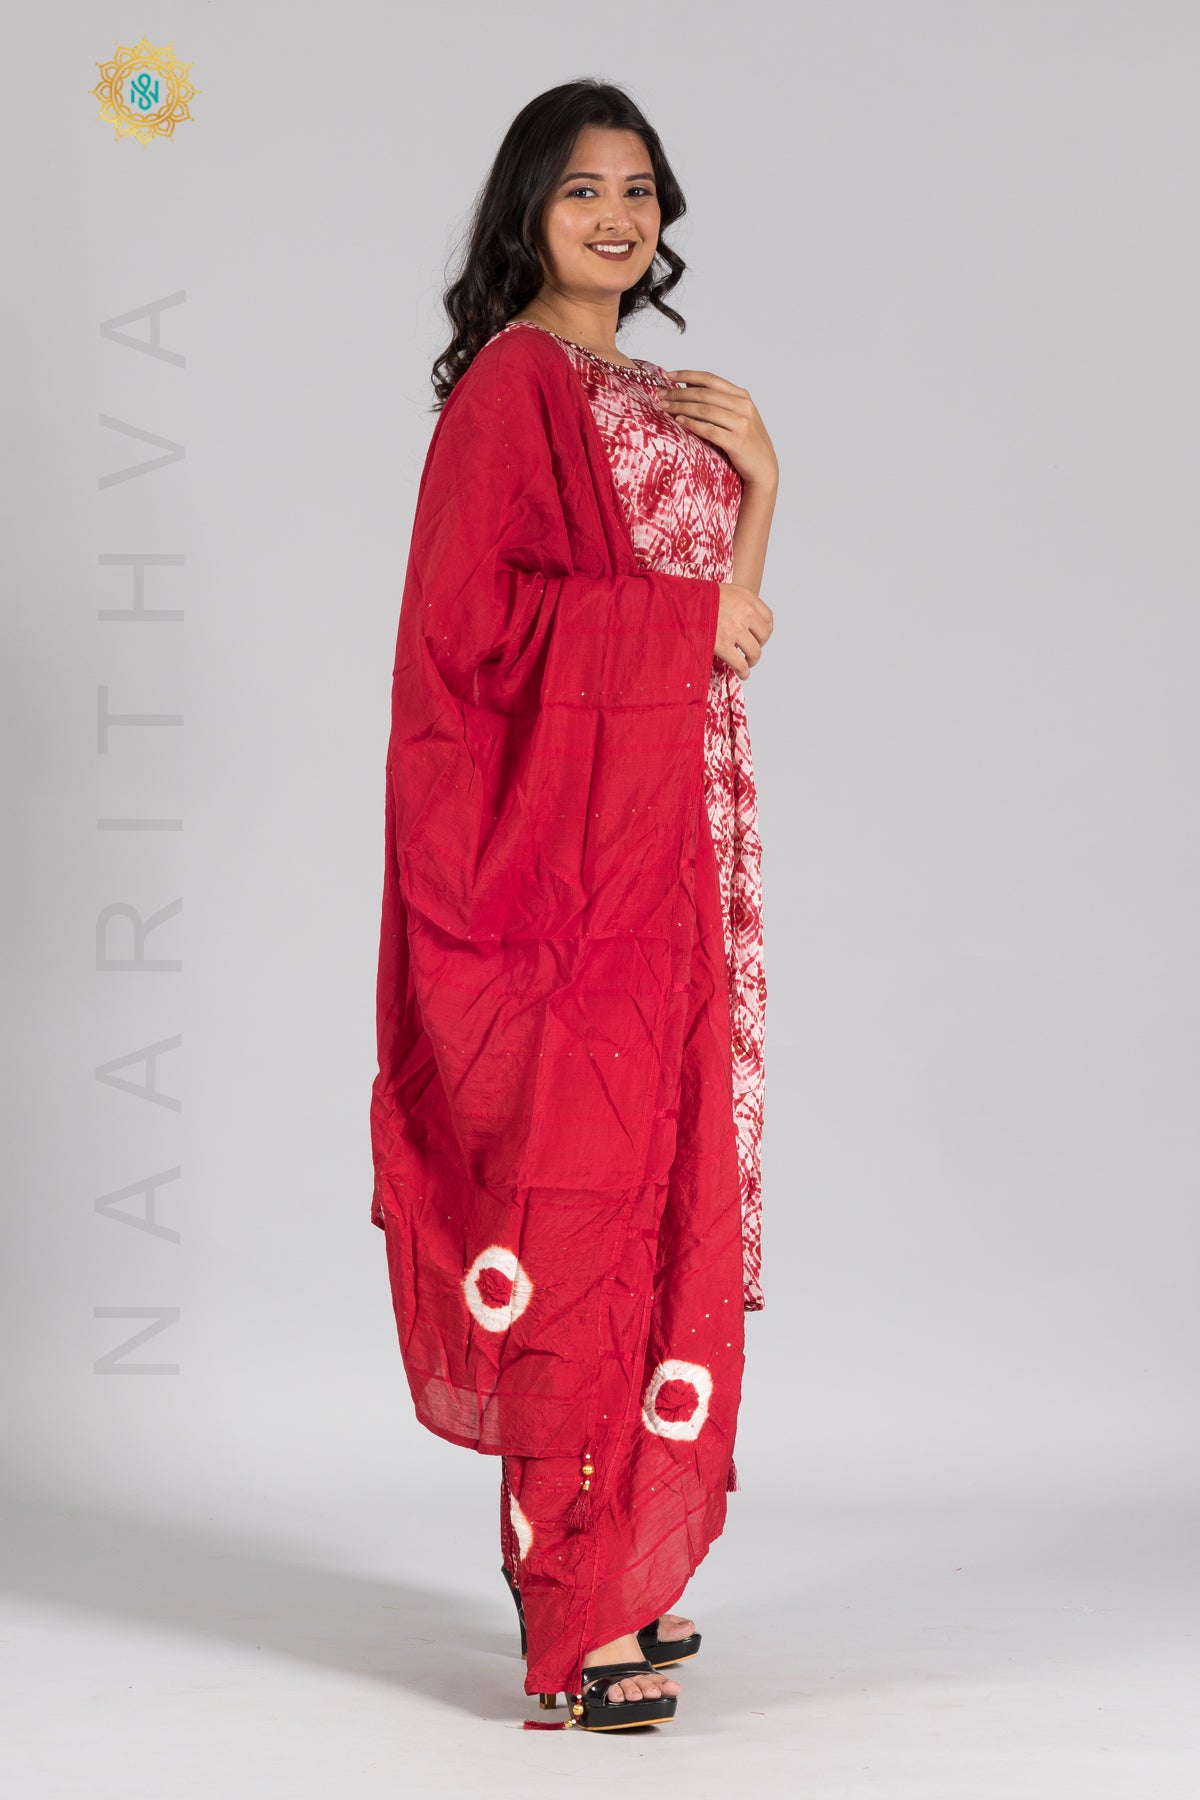 Party Wear Nayra Cut Suits for Women - Buy Now